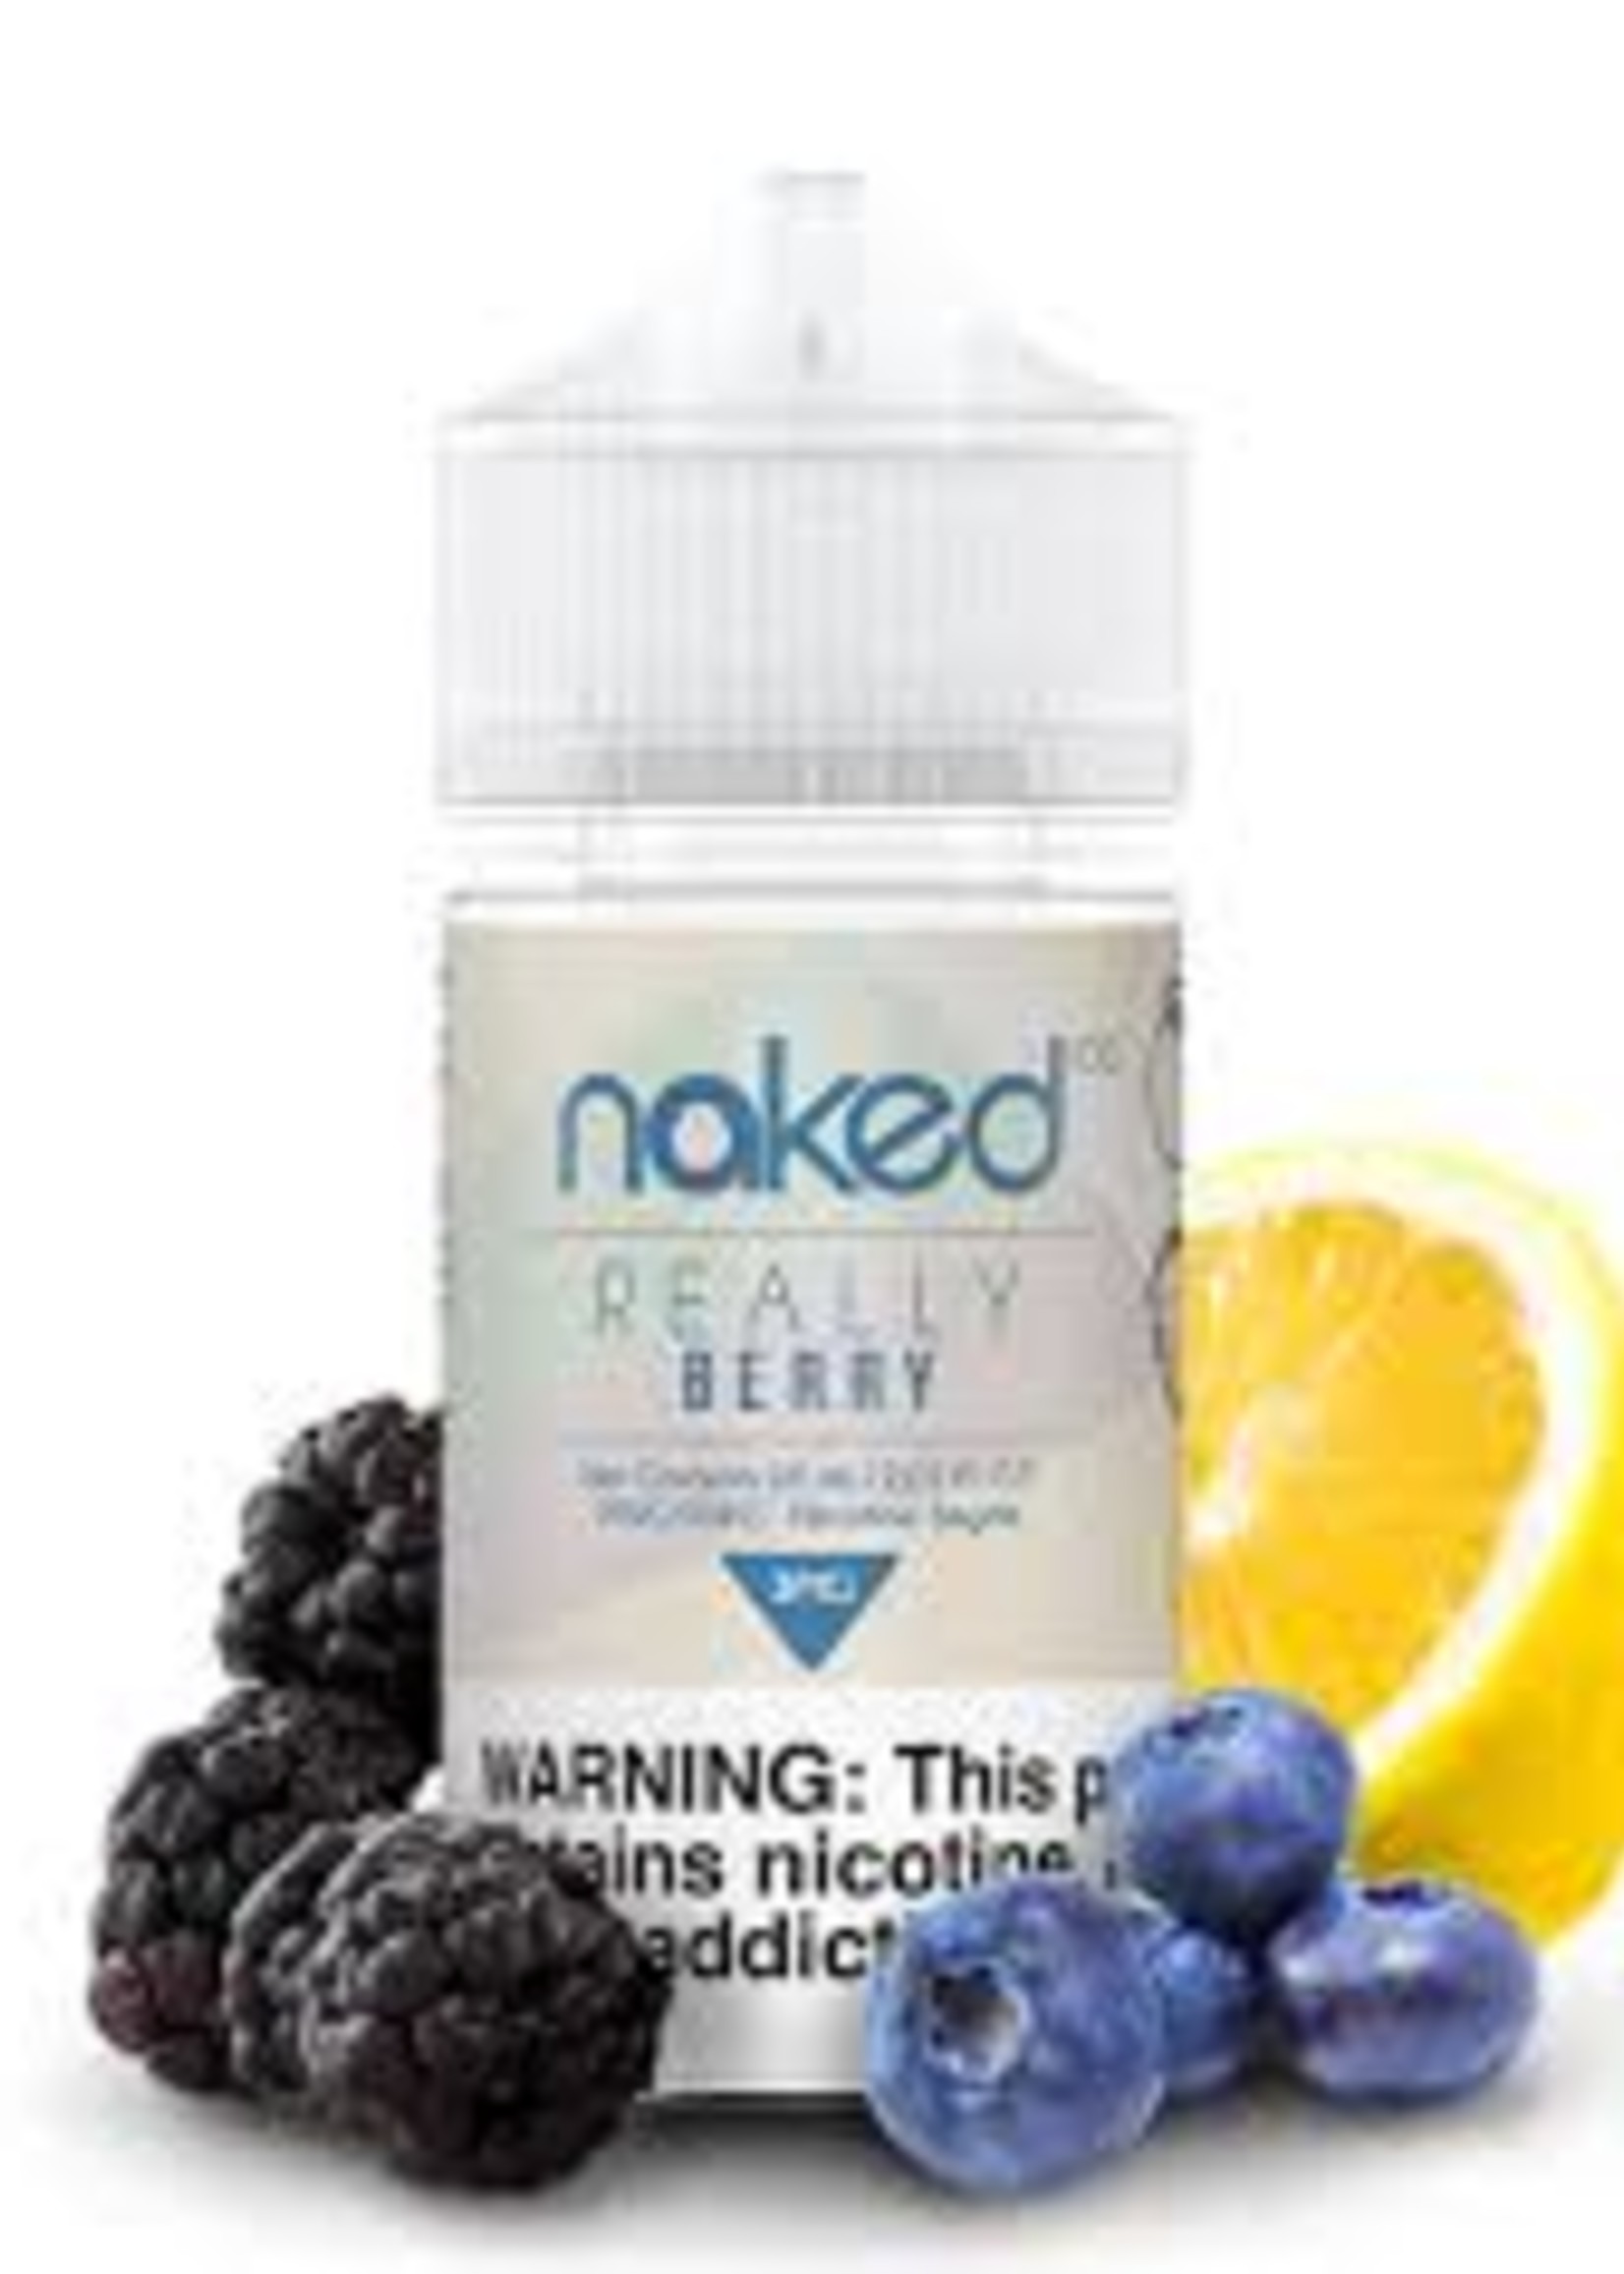 Naked Naked Really Berry (Very Berry) 6mg 60mL